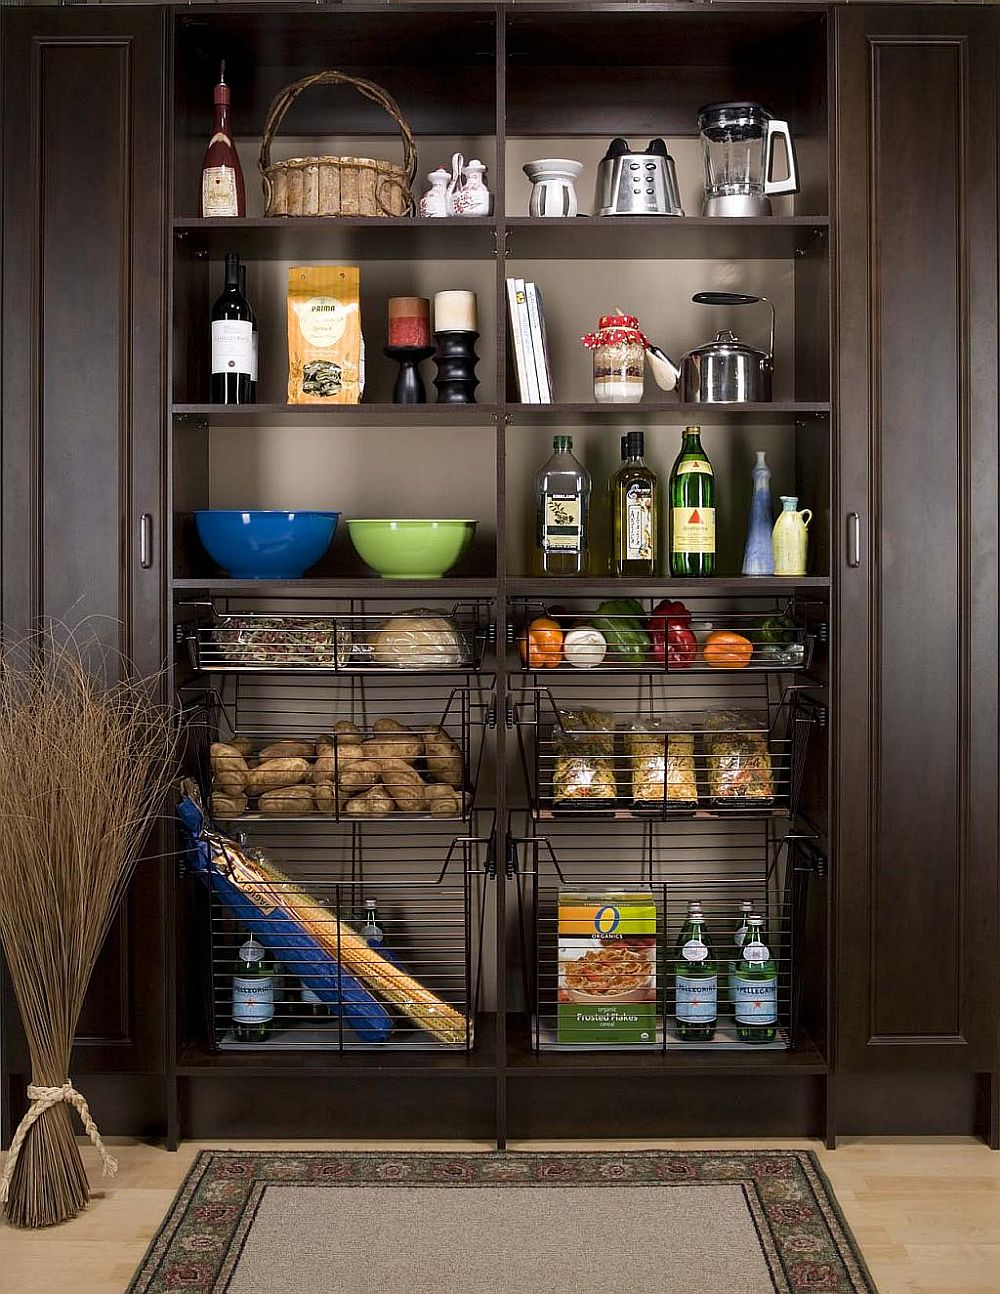 Wiry-baskets-bring-additional-storage-space-to-the-open-pantry